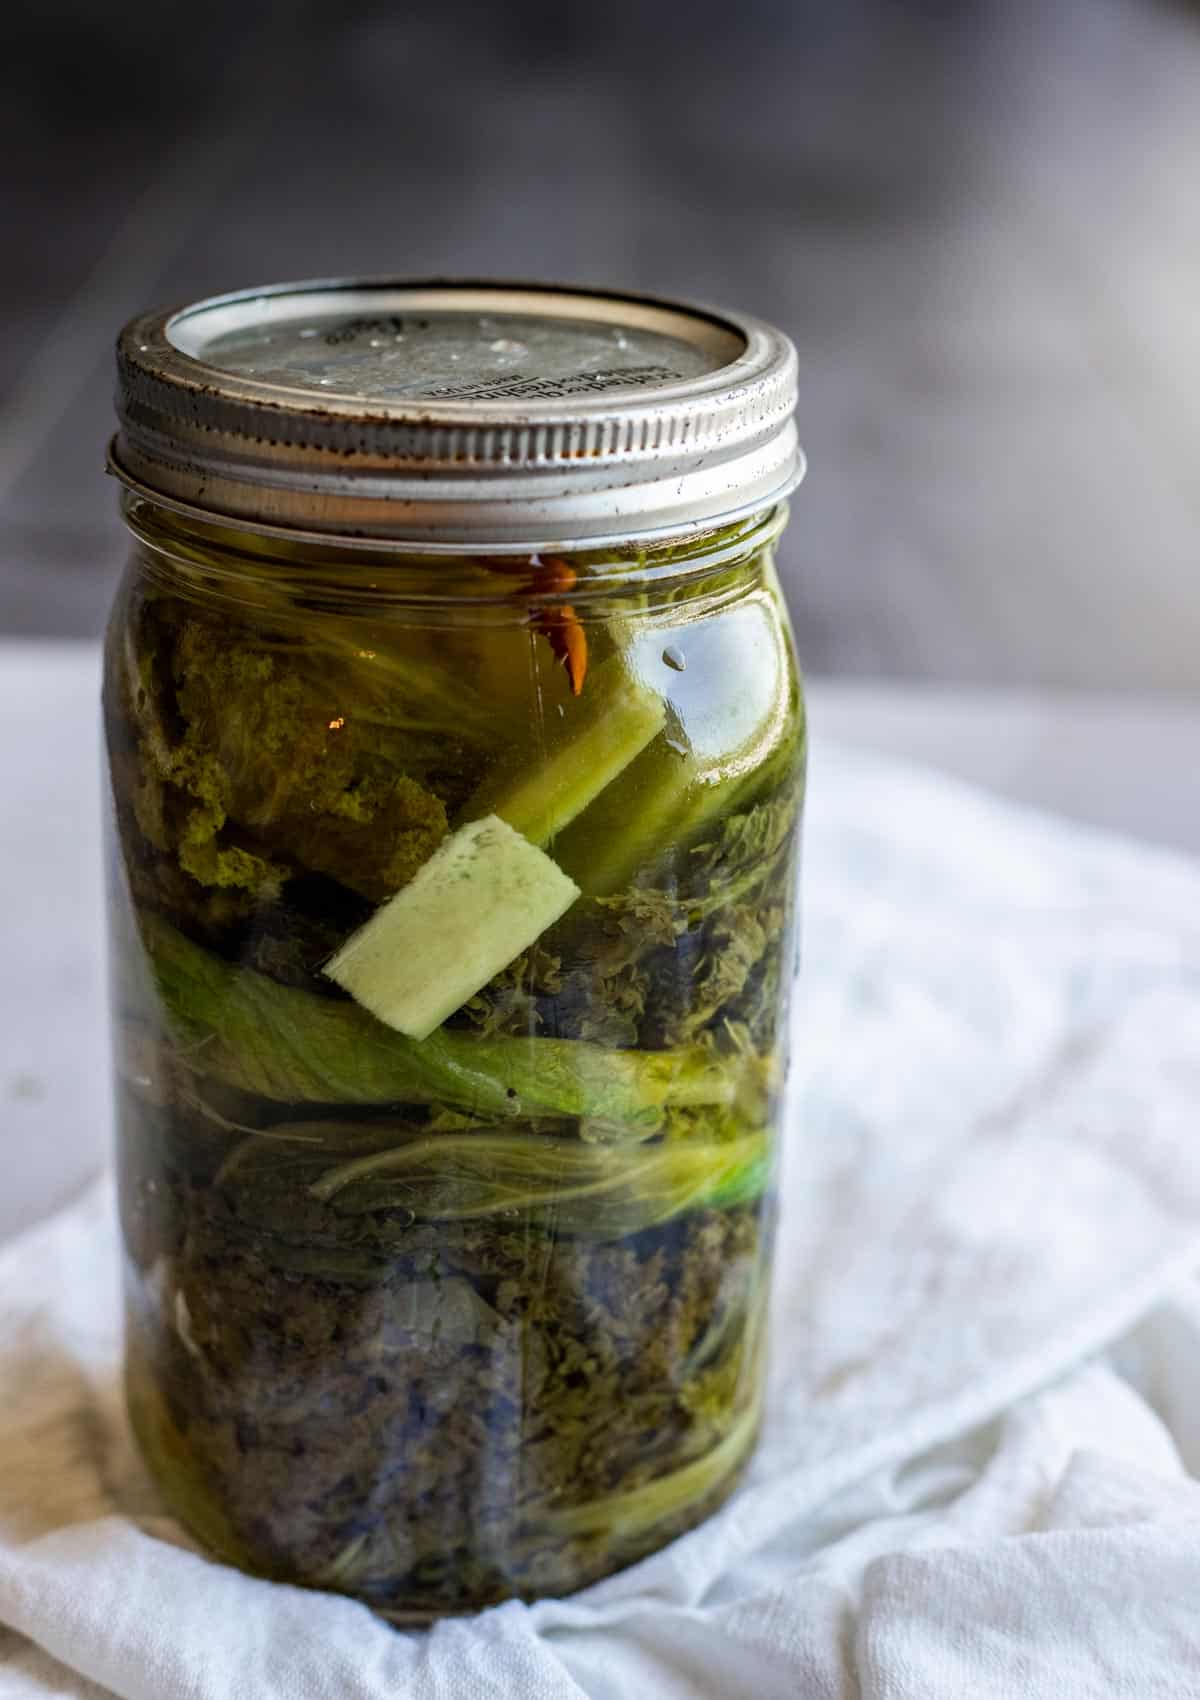 Pickled mustard greens in a glass jar with a lid.